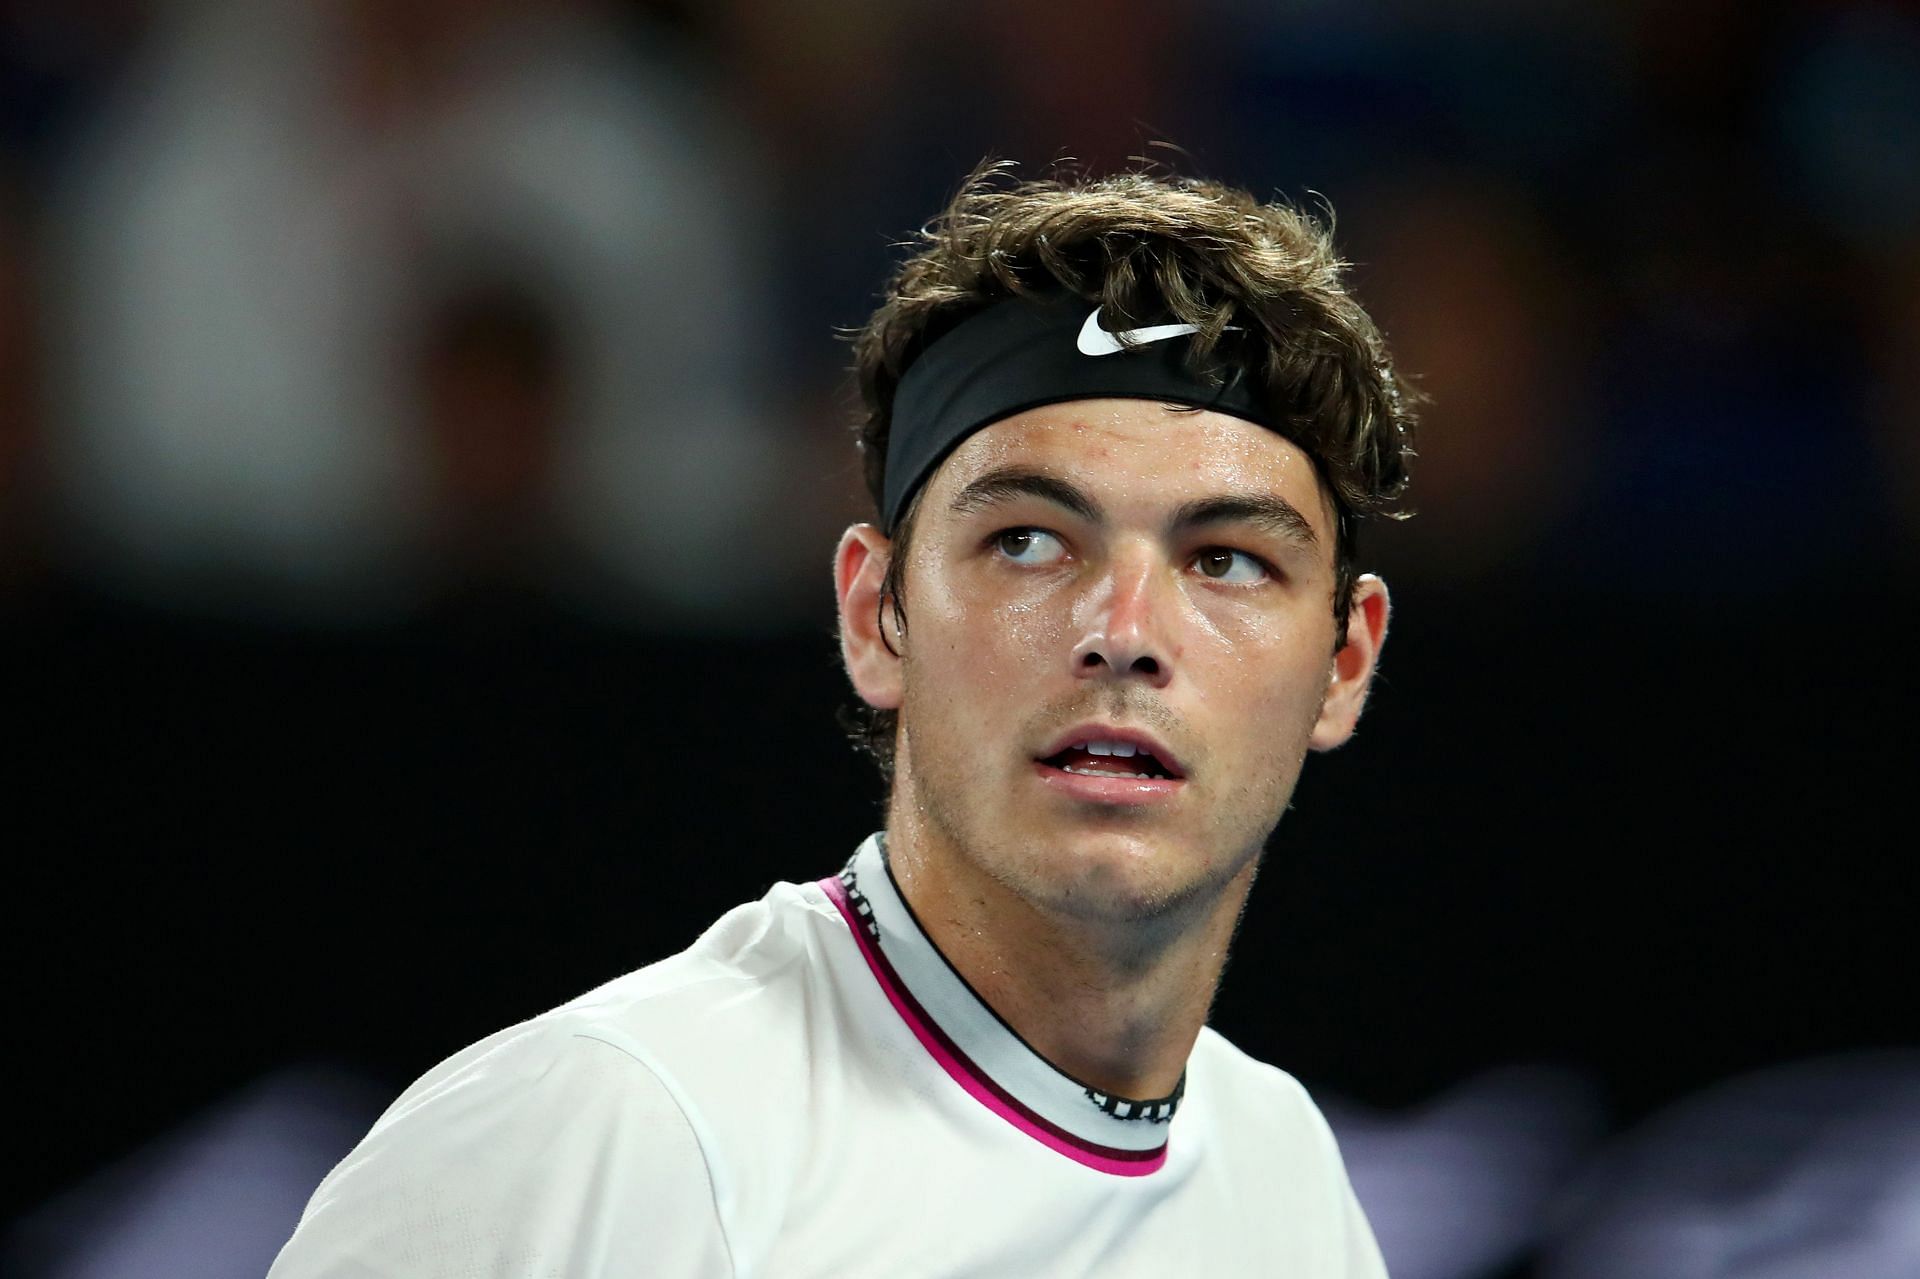 Taylor Fritz is the fifth seed in St. Petersburg this week.